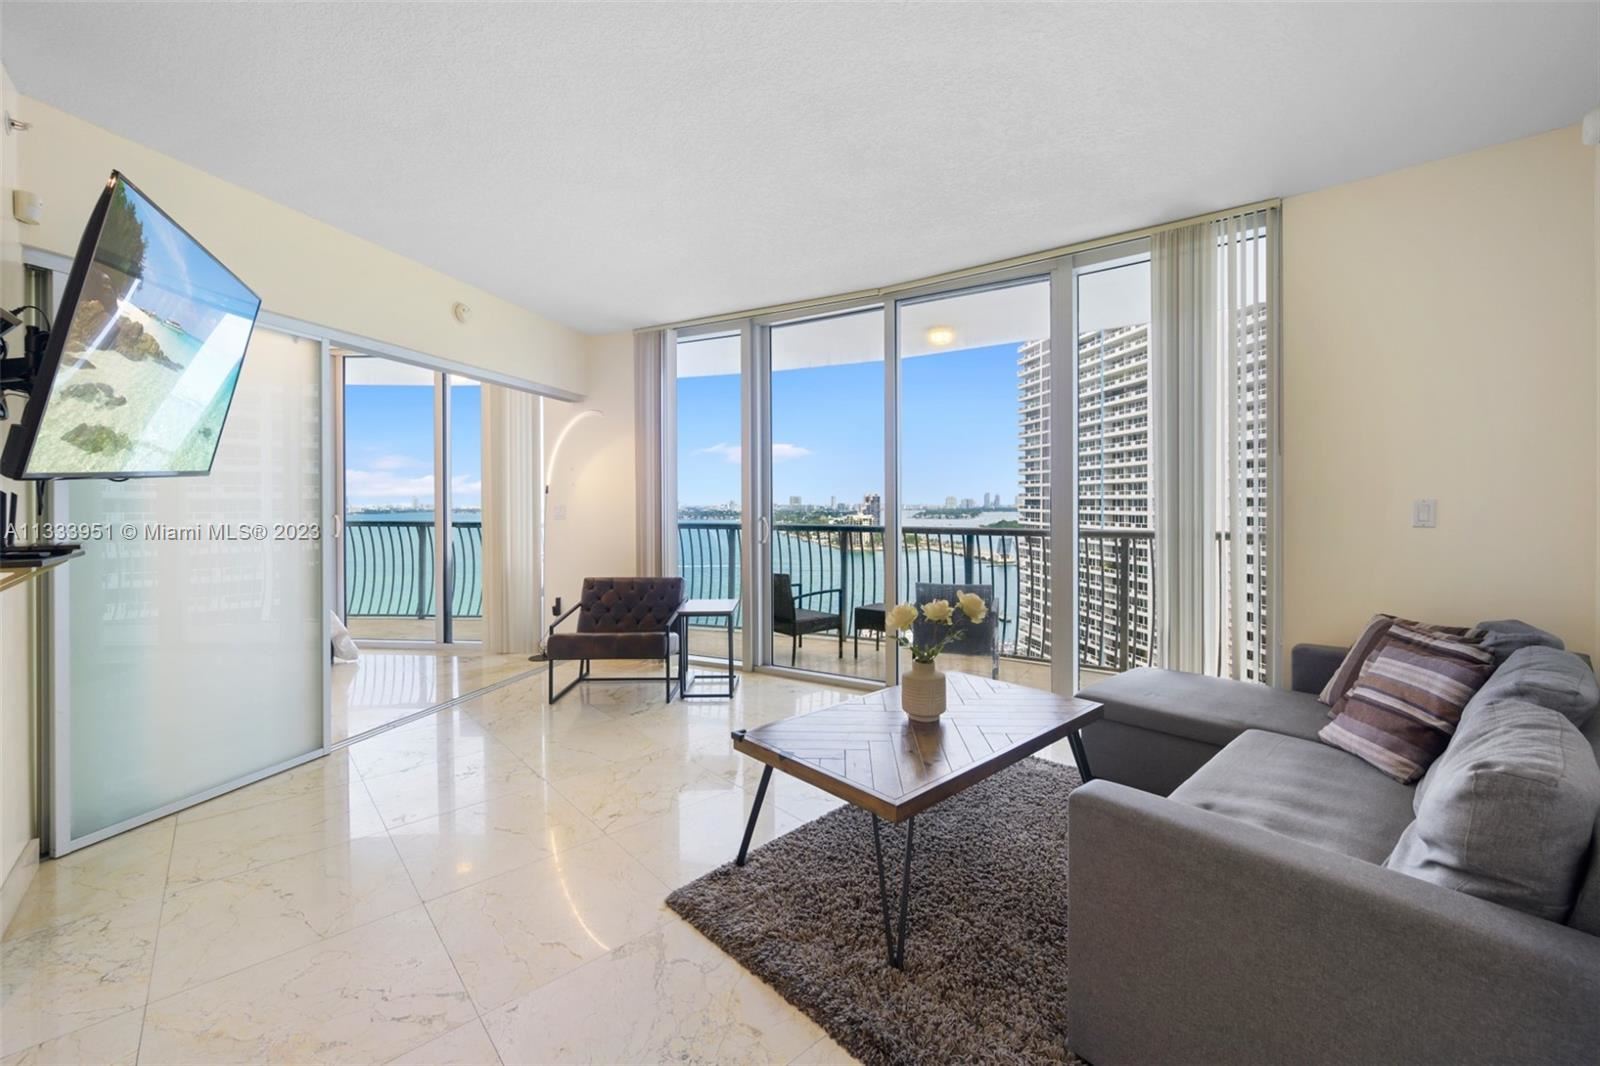 Photo 1 of Listing MLS a11333951 in 1750 N Bayshore Dr #2102 Miami FL 33132